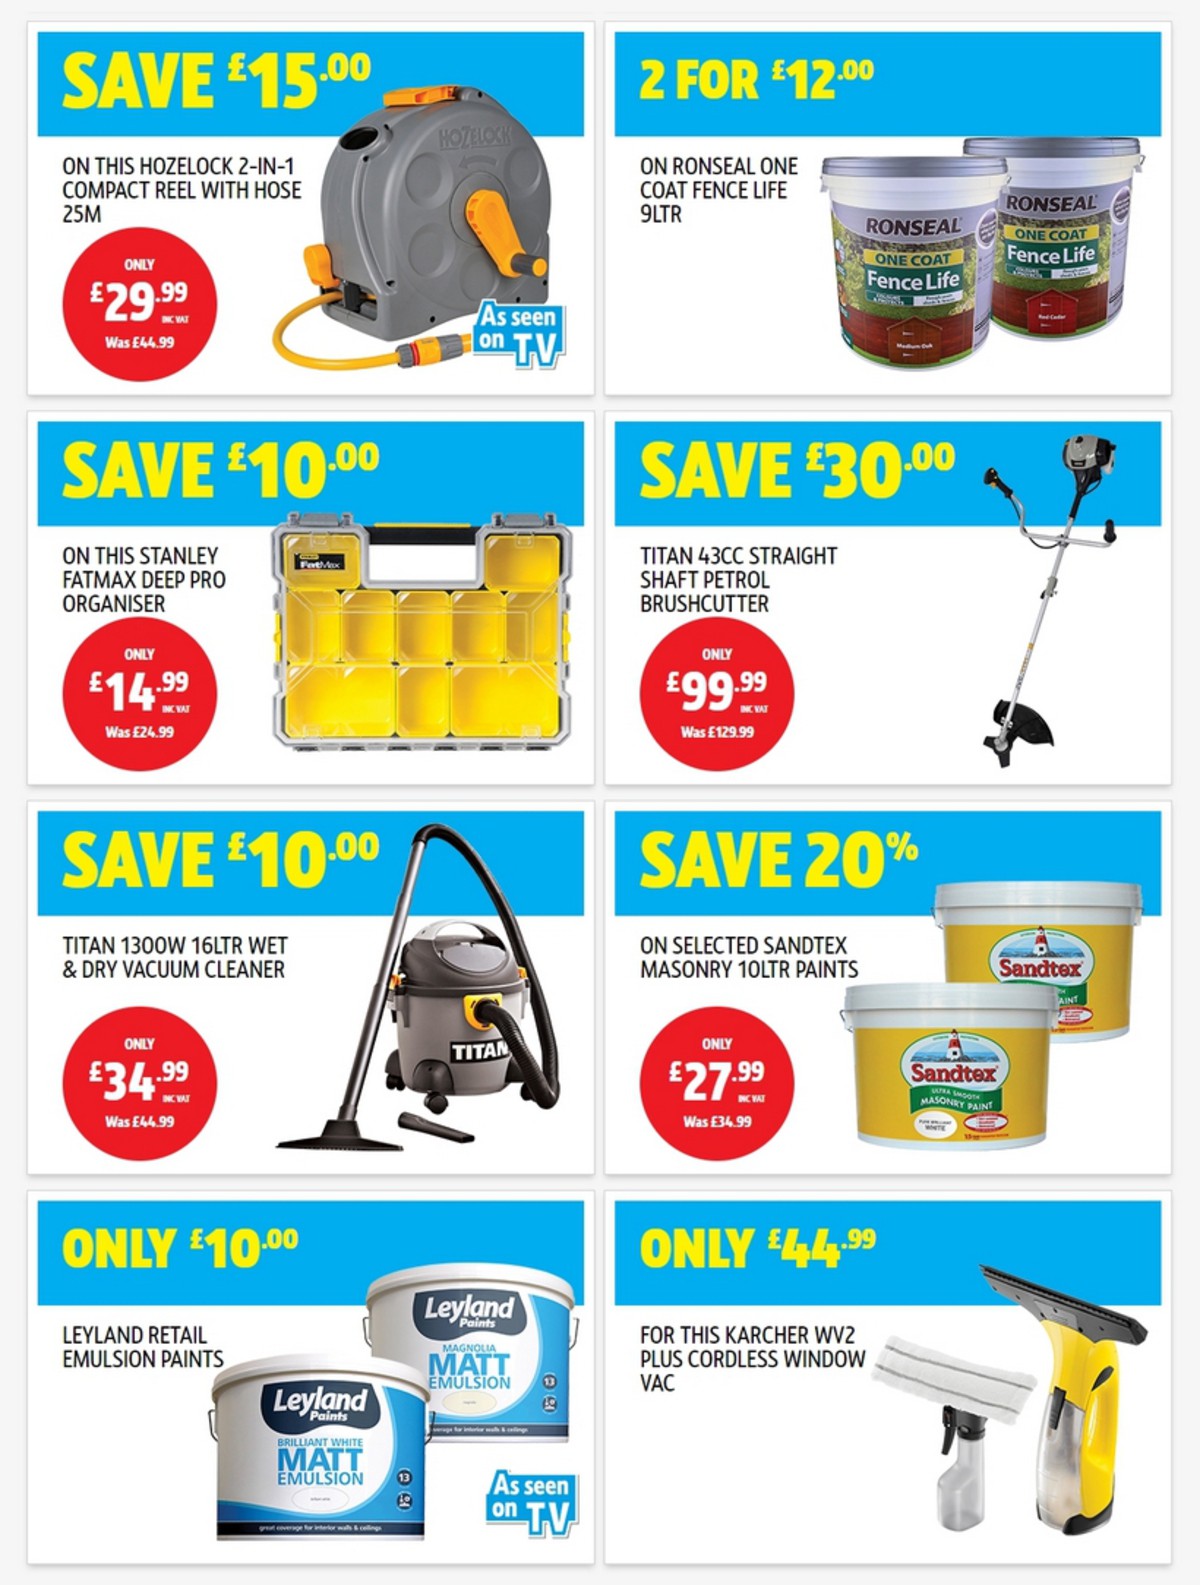 Screwfix Offers from 1 May